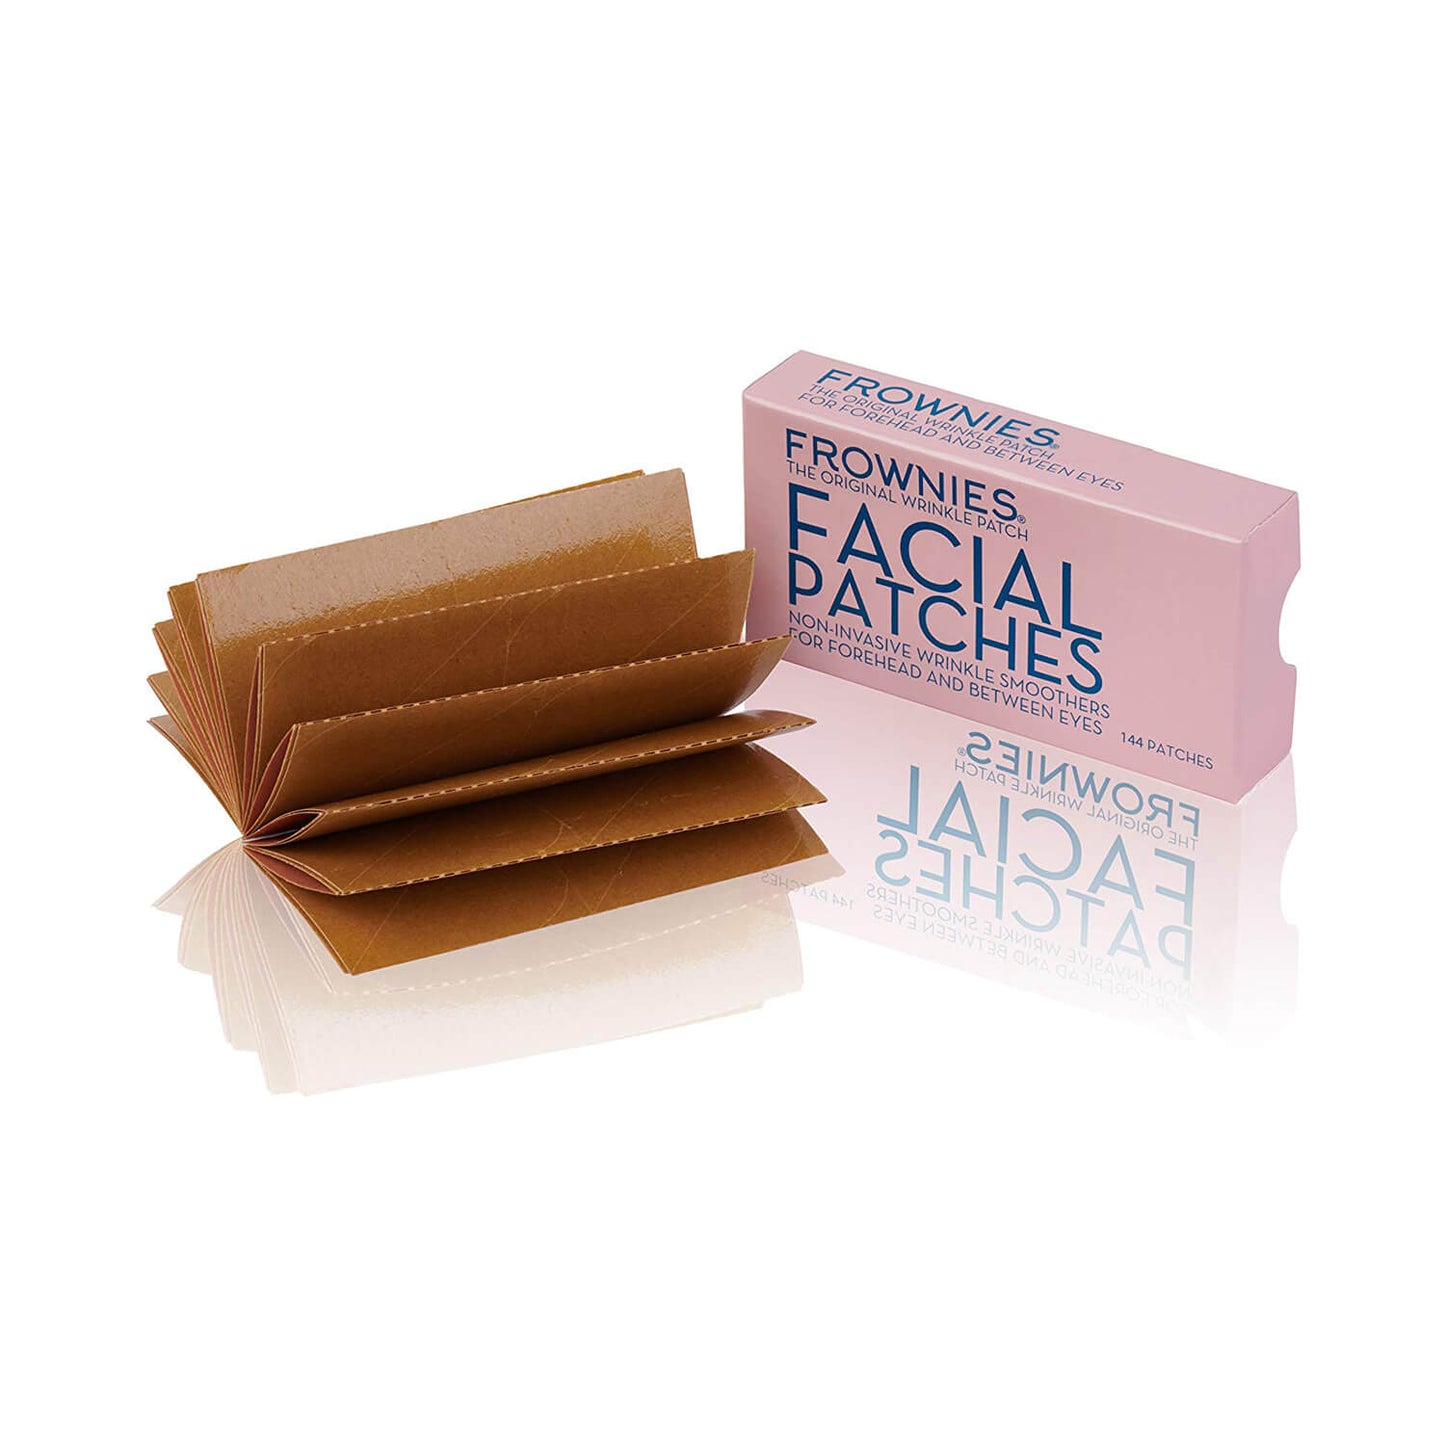 Frownies 144 Facial Patches for Wrinkles on the Forehead & Between Eyes (FBE) Open